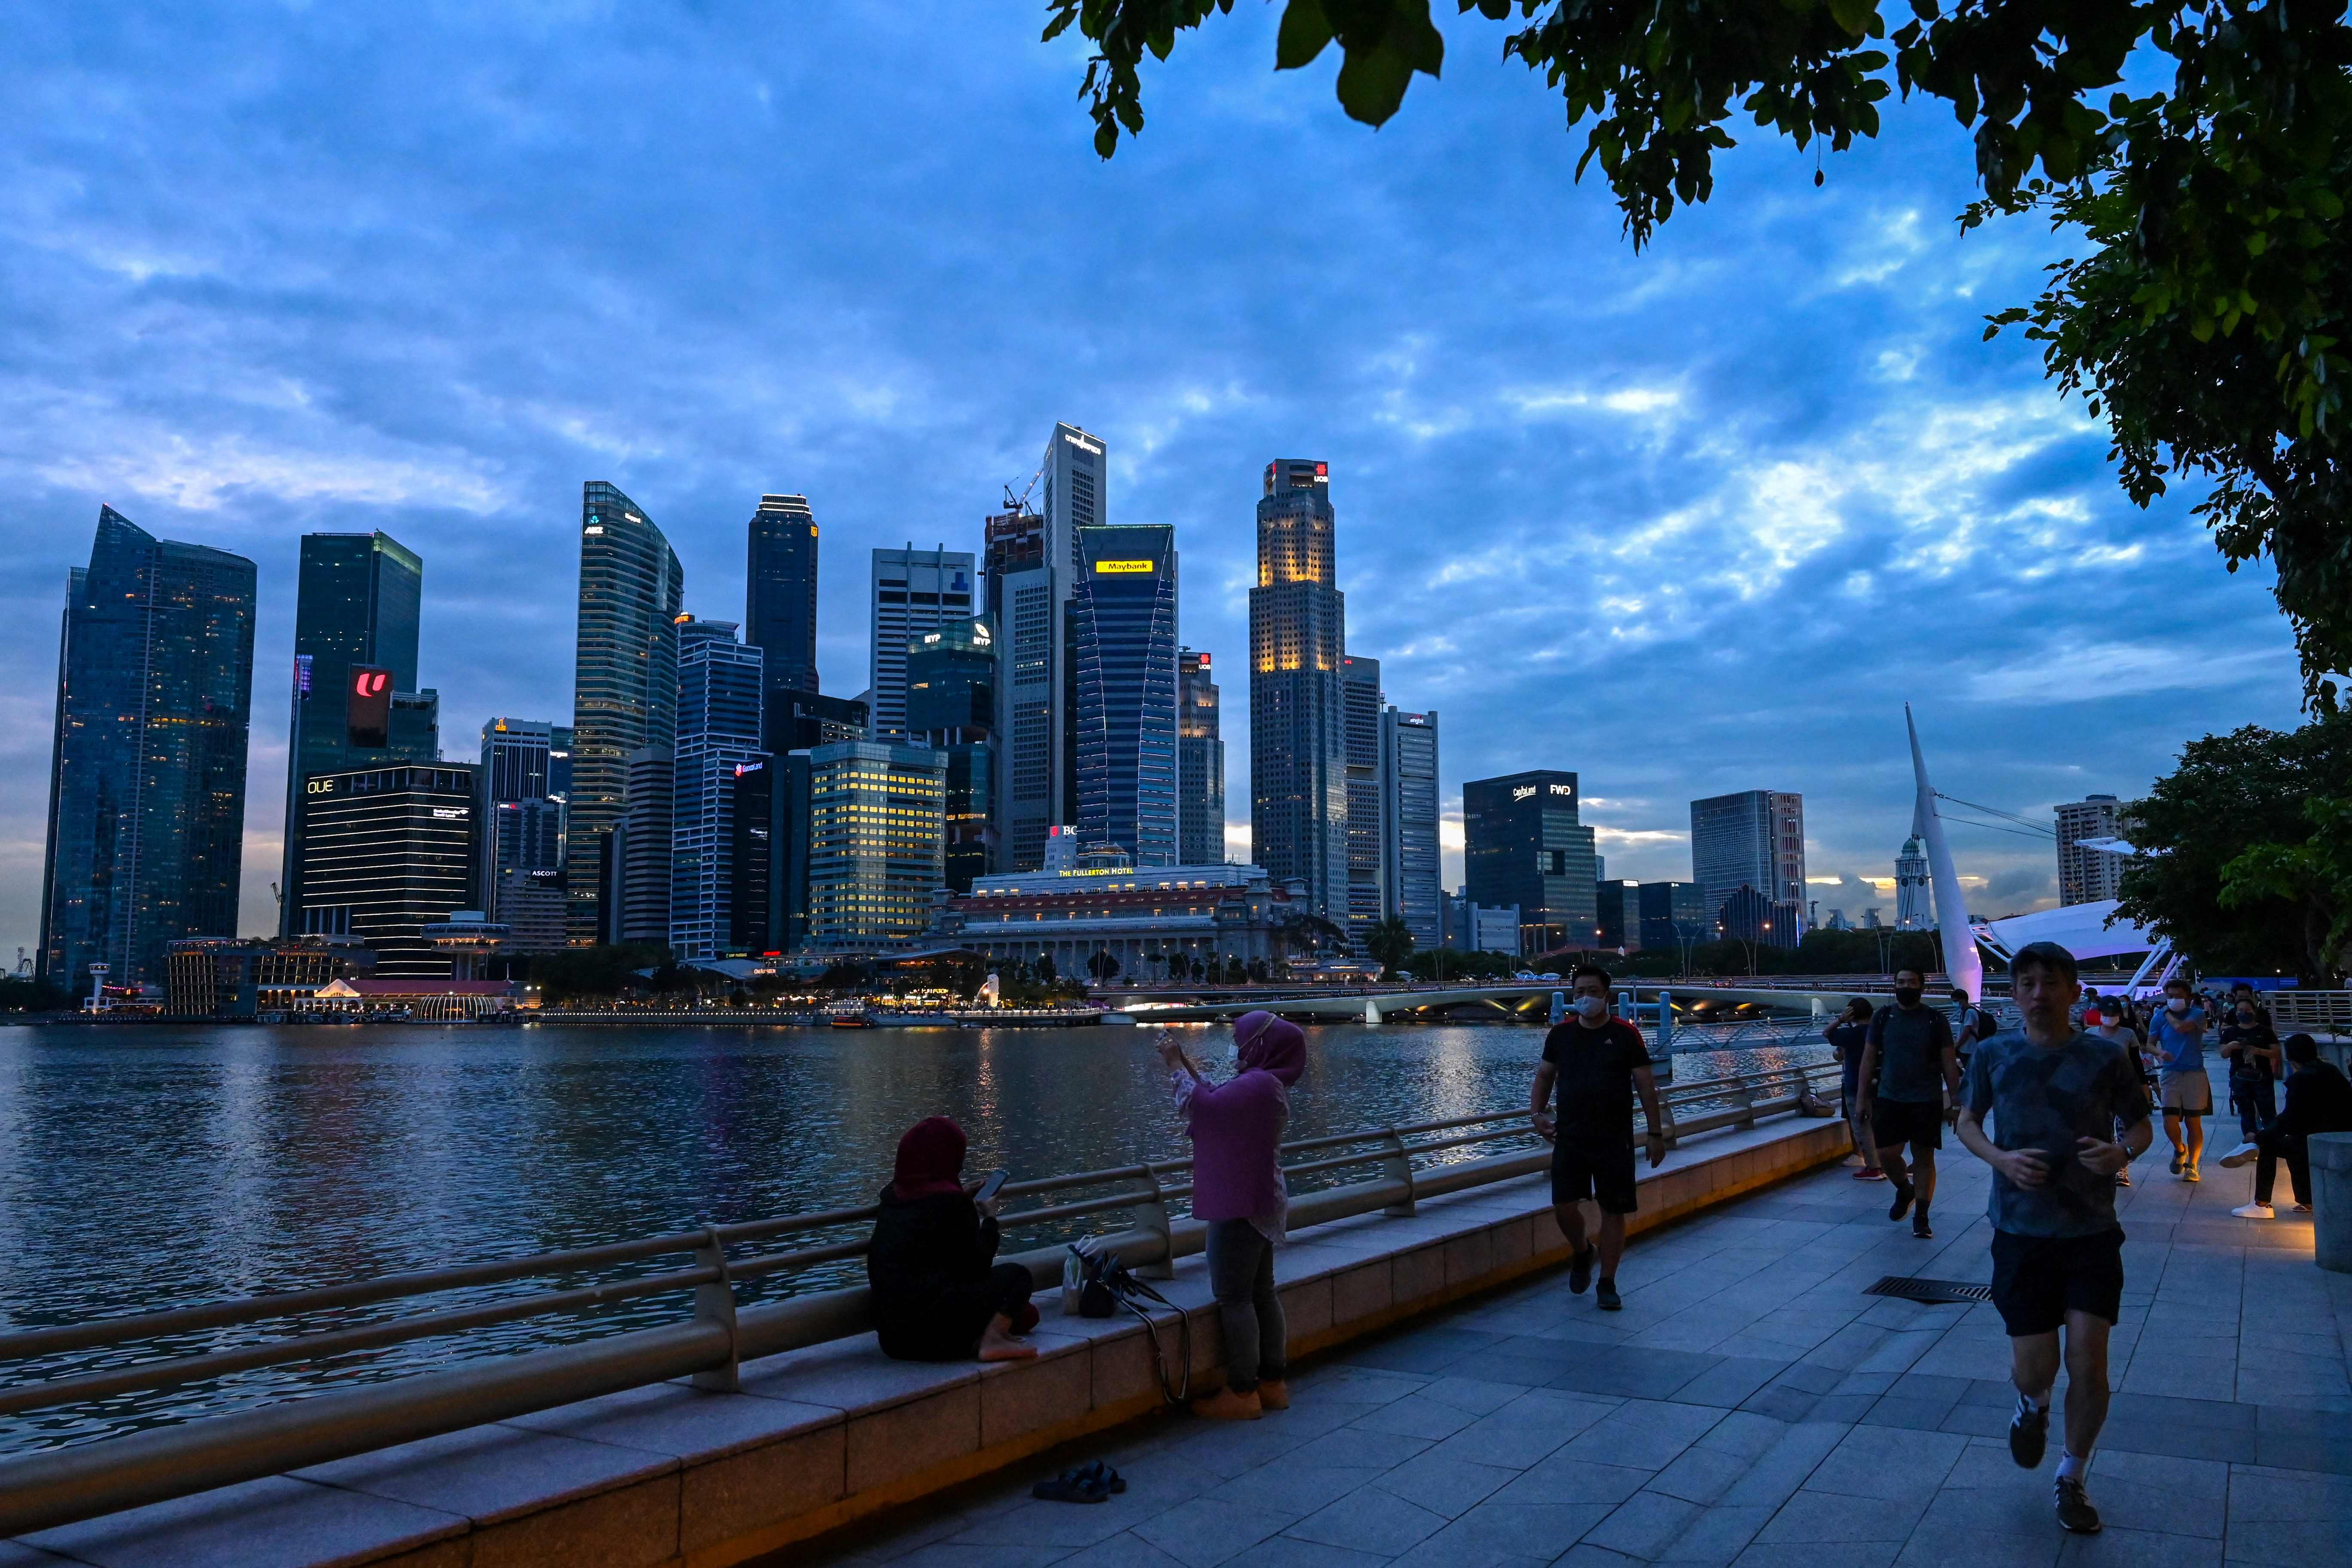 A representational image showing people sitting and walking at the Marina Bay at dusk in Singapore